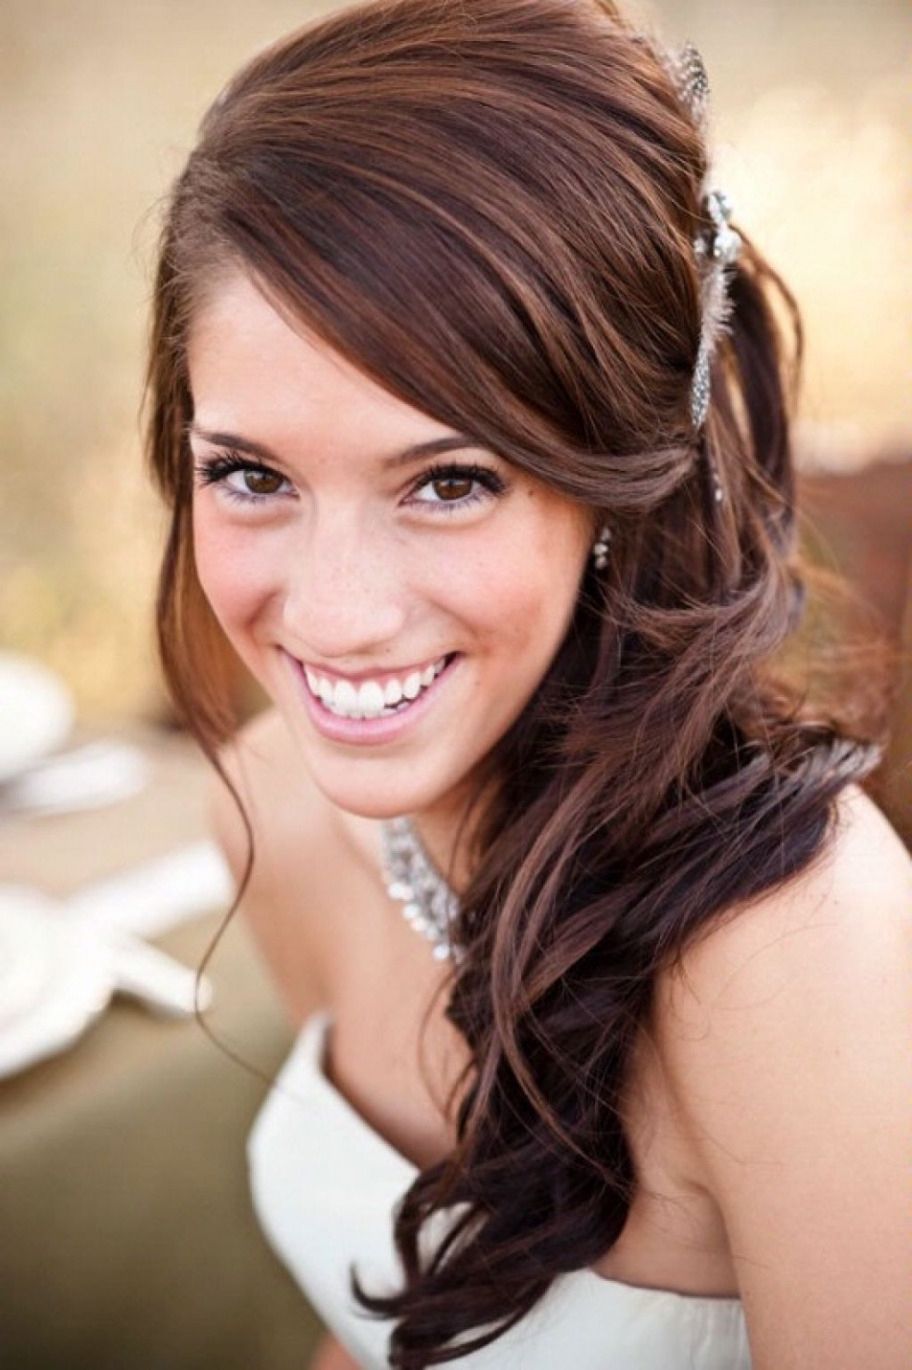 Best And Newest Wedding Hairstyles For Long Hair With Side Swept With Regard To Pretty Swept Wedding Hairstyles Hair Ideas For Long Brunette Side (View 11 of 15)